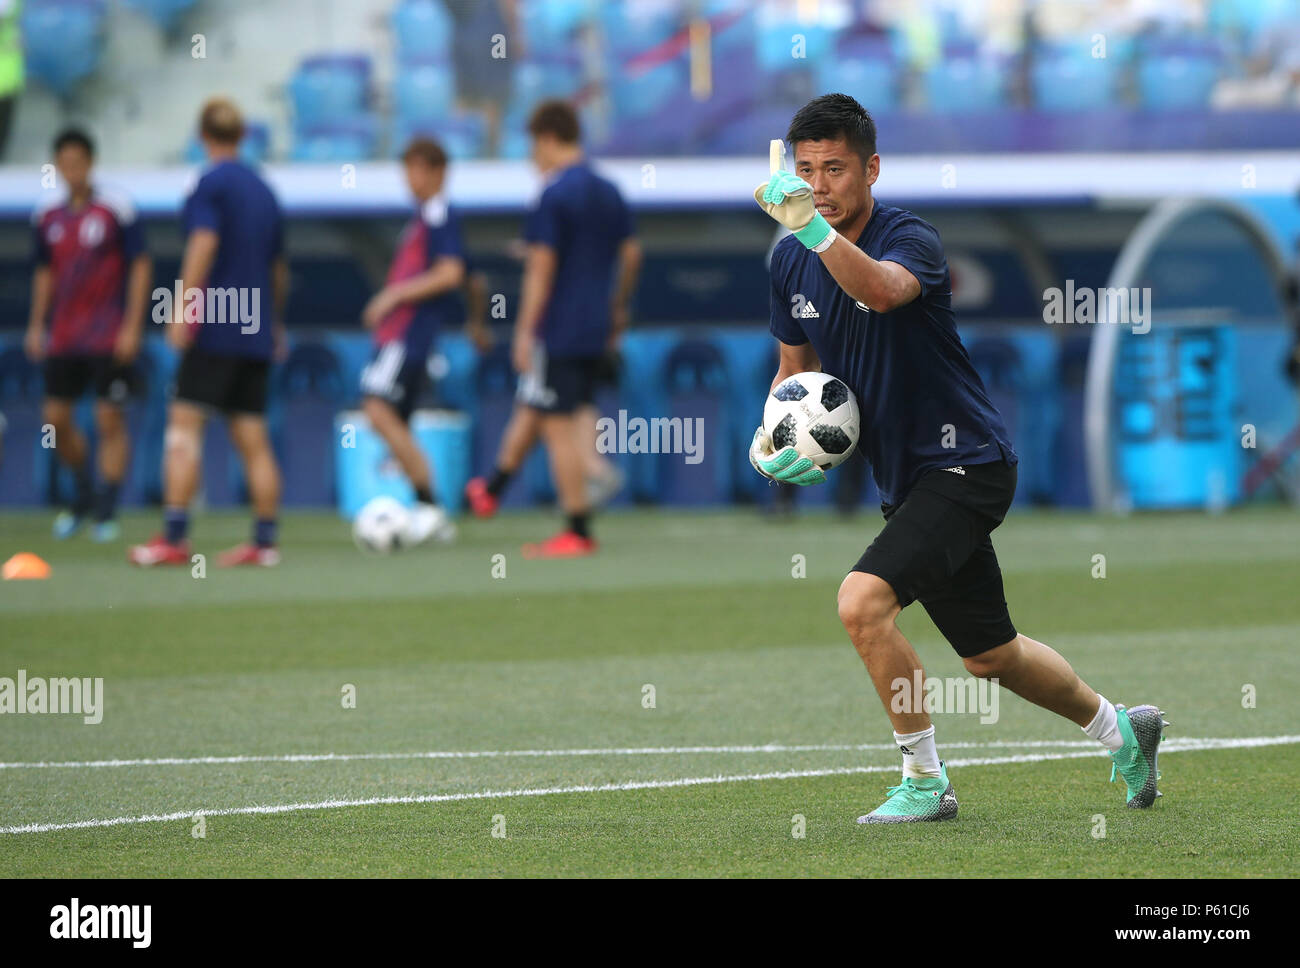 Volgograd, Russia. 28th June, 2018. Japan's goalkeeper Eiji Kawashima warms up prior to the 2018 FIFA World Cup Group H match between Japan and Poland in Volgograd, Russia, June 28, 2018. Credit: Wu Zhuang/Xinhua/Alamy Live News Stock Photo